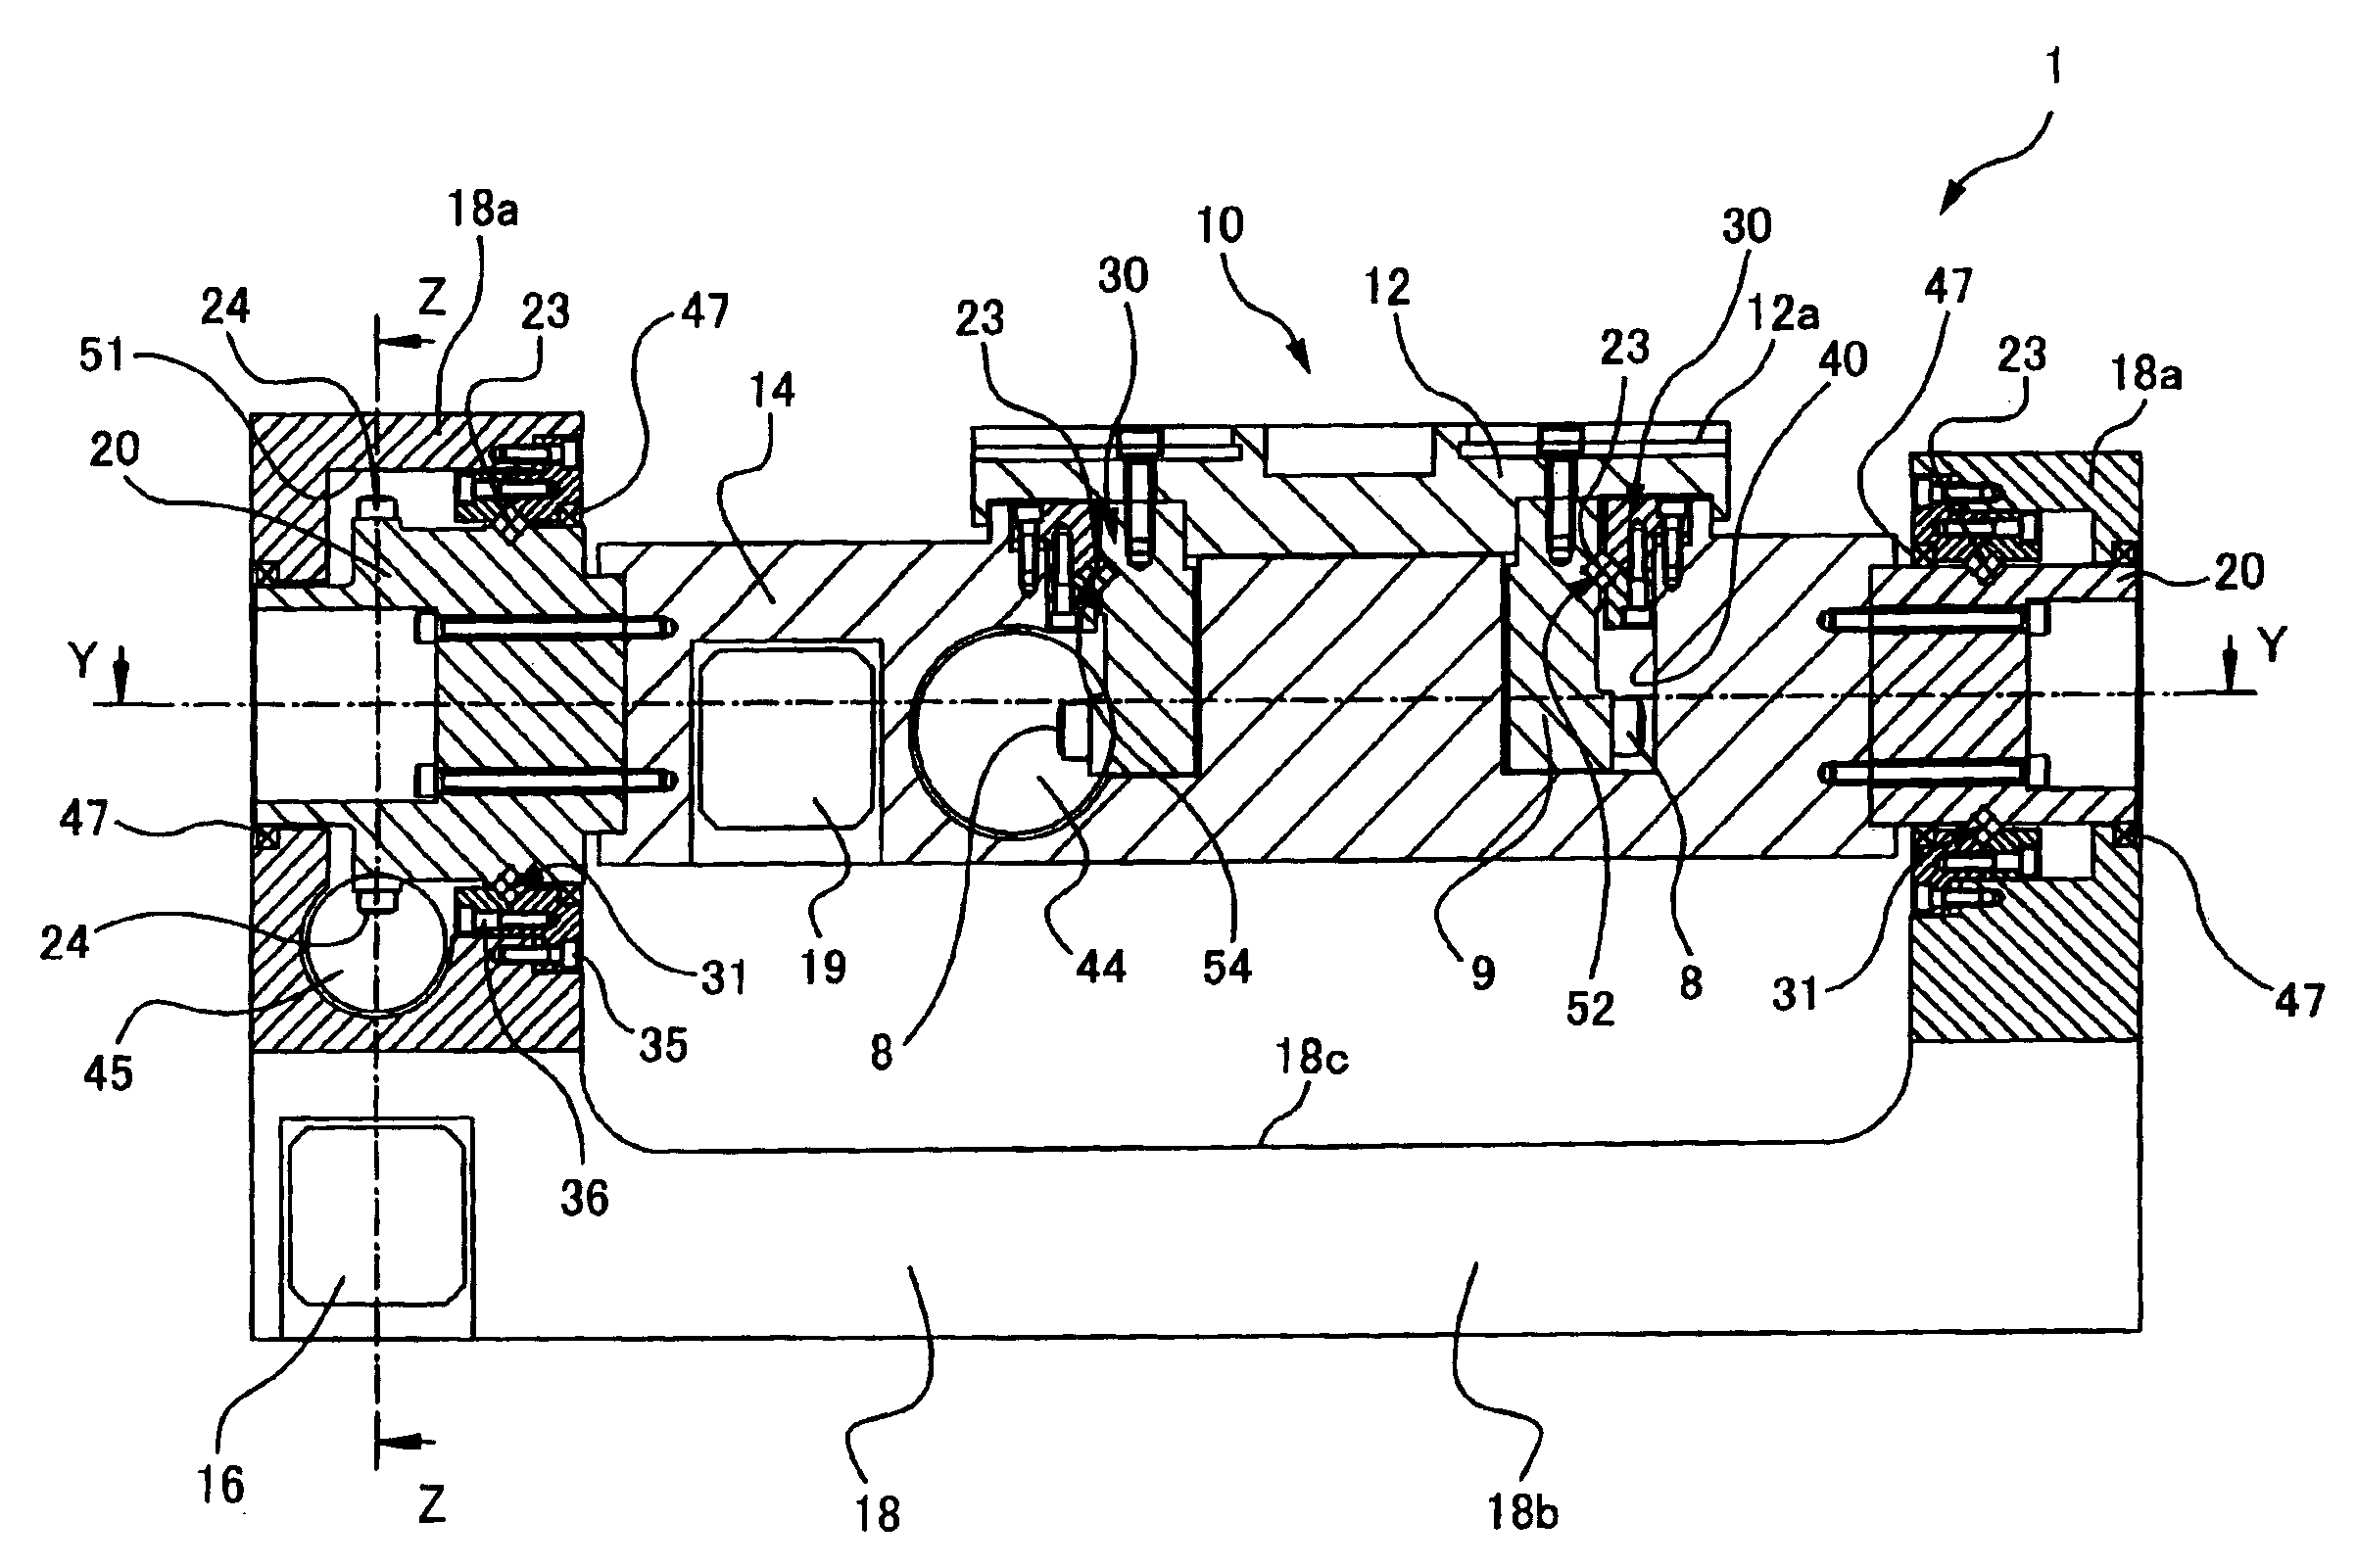 Inclining and rotating table apparatus